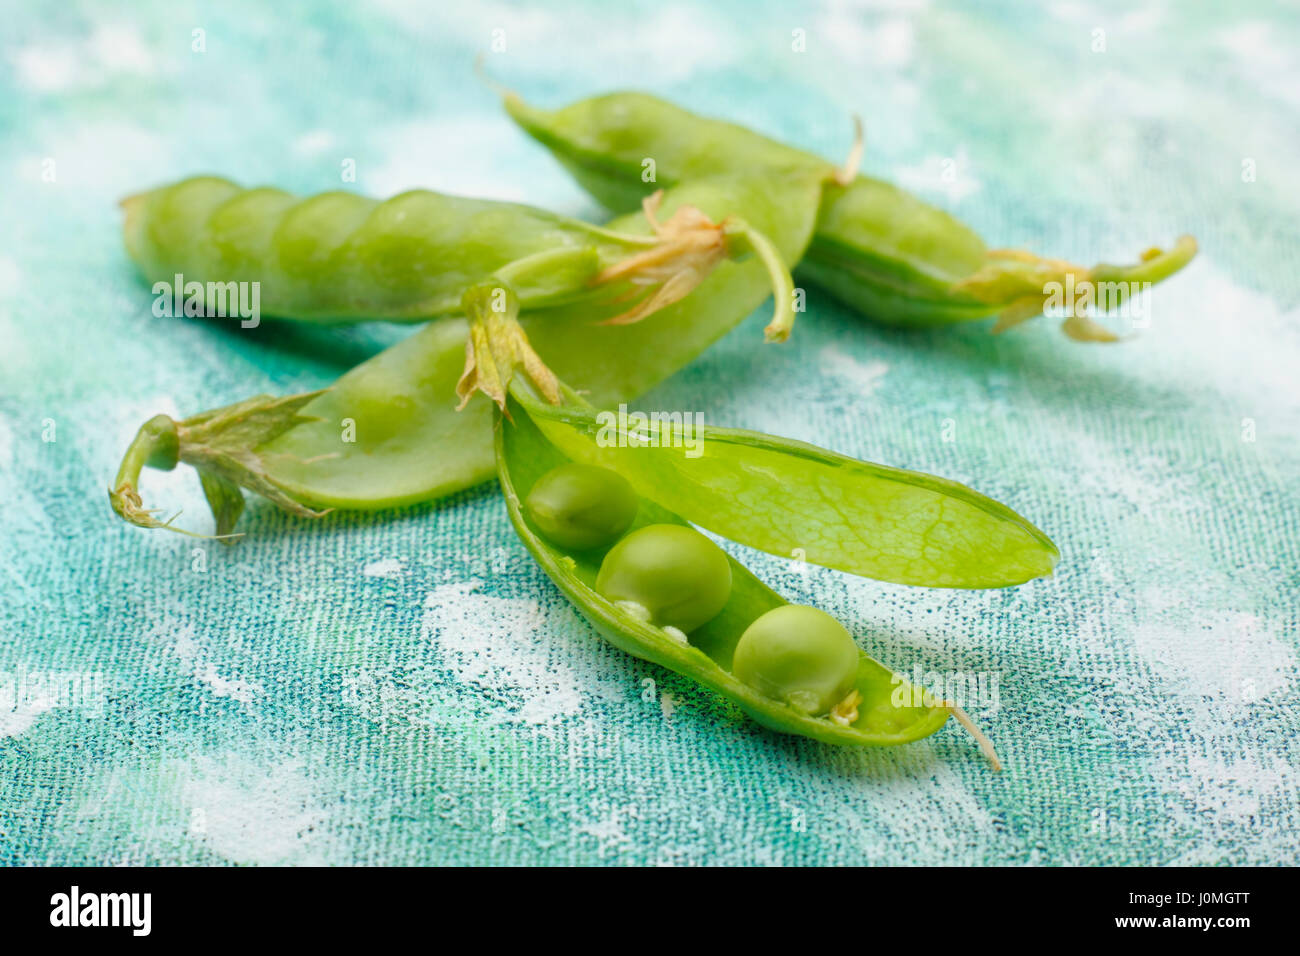 Fresh green pea pods with one pod opened. Stock Photo